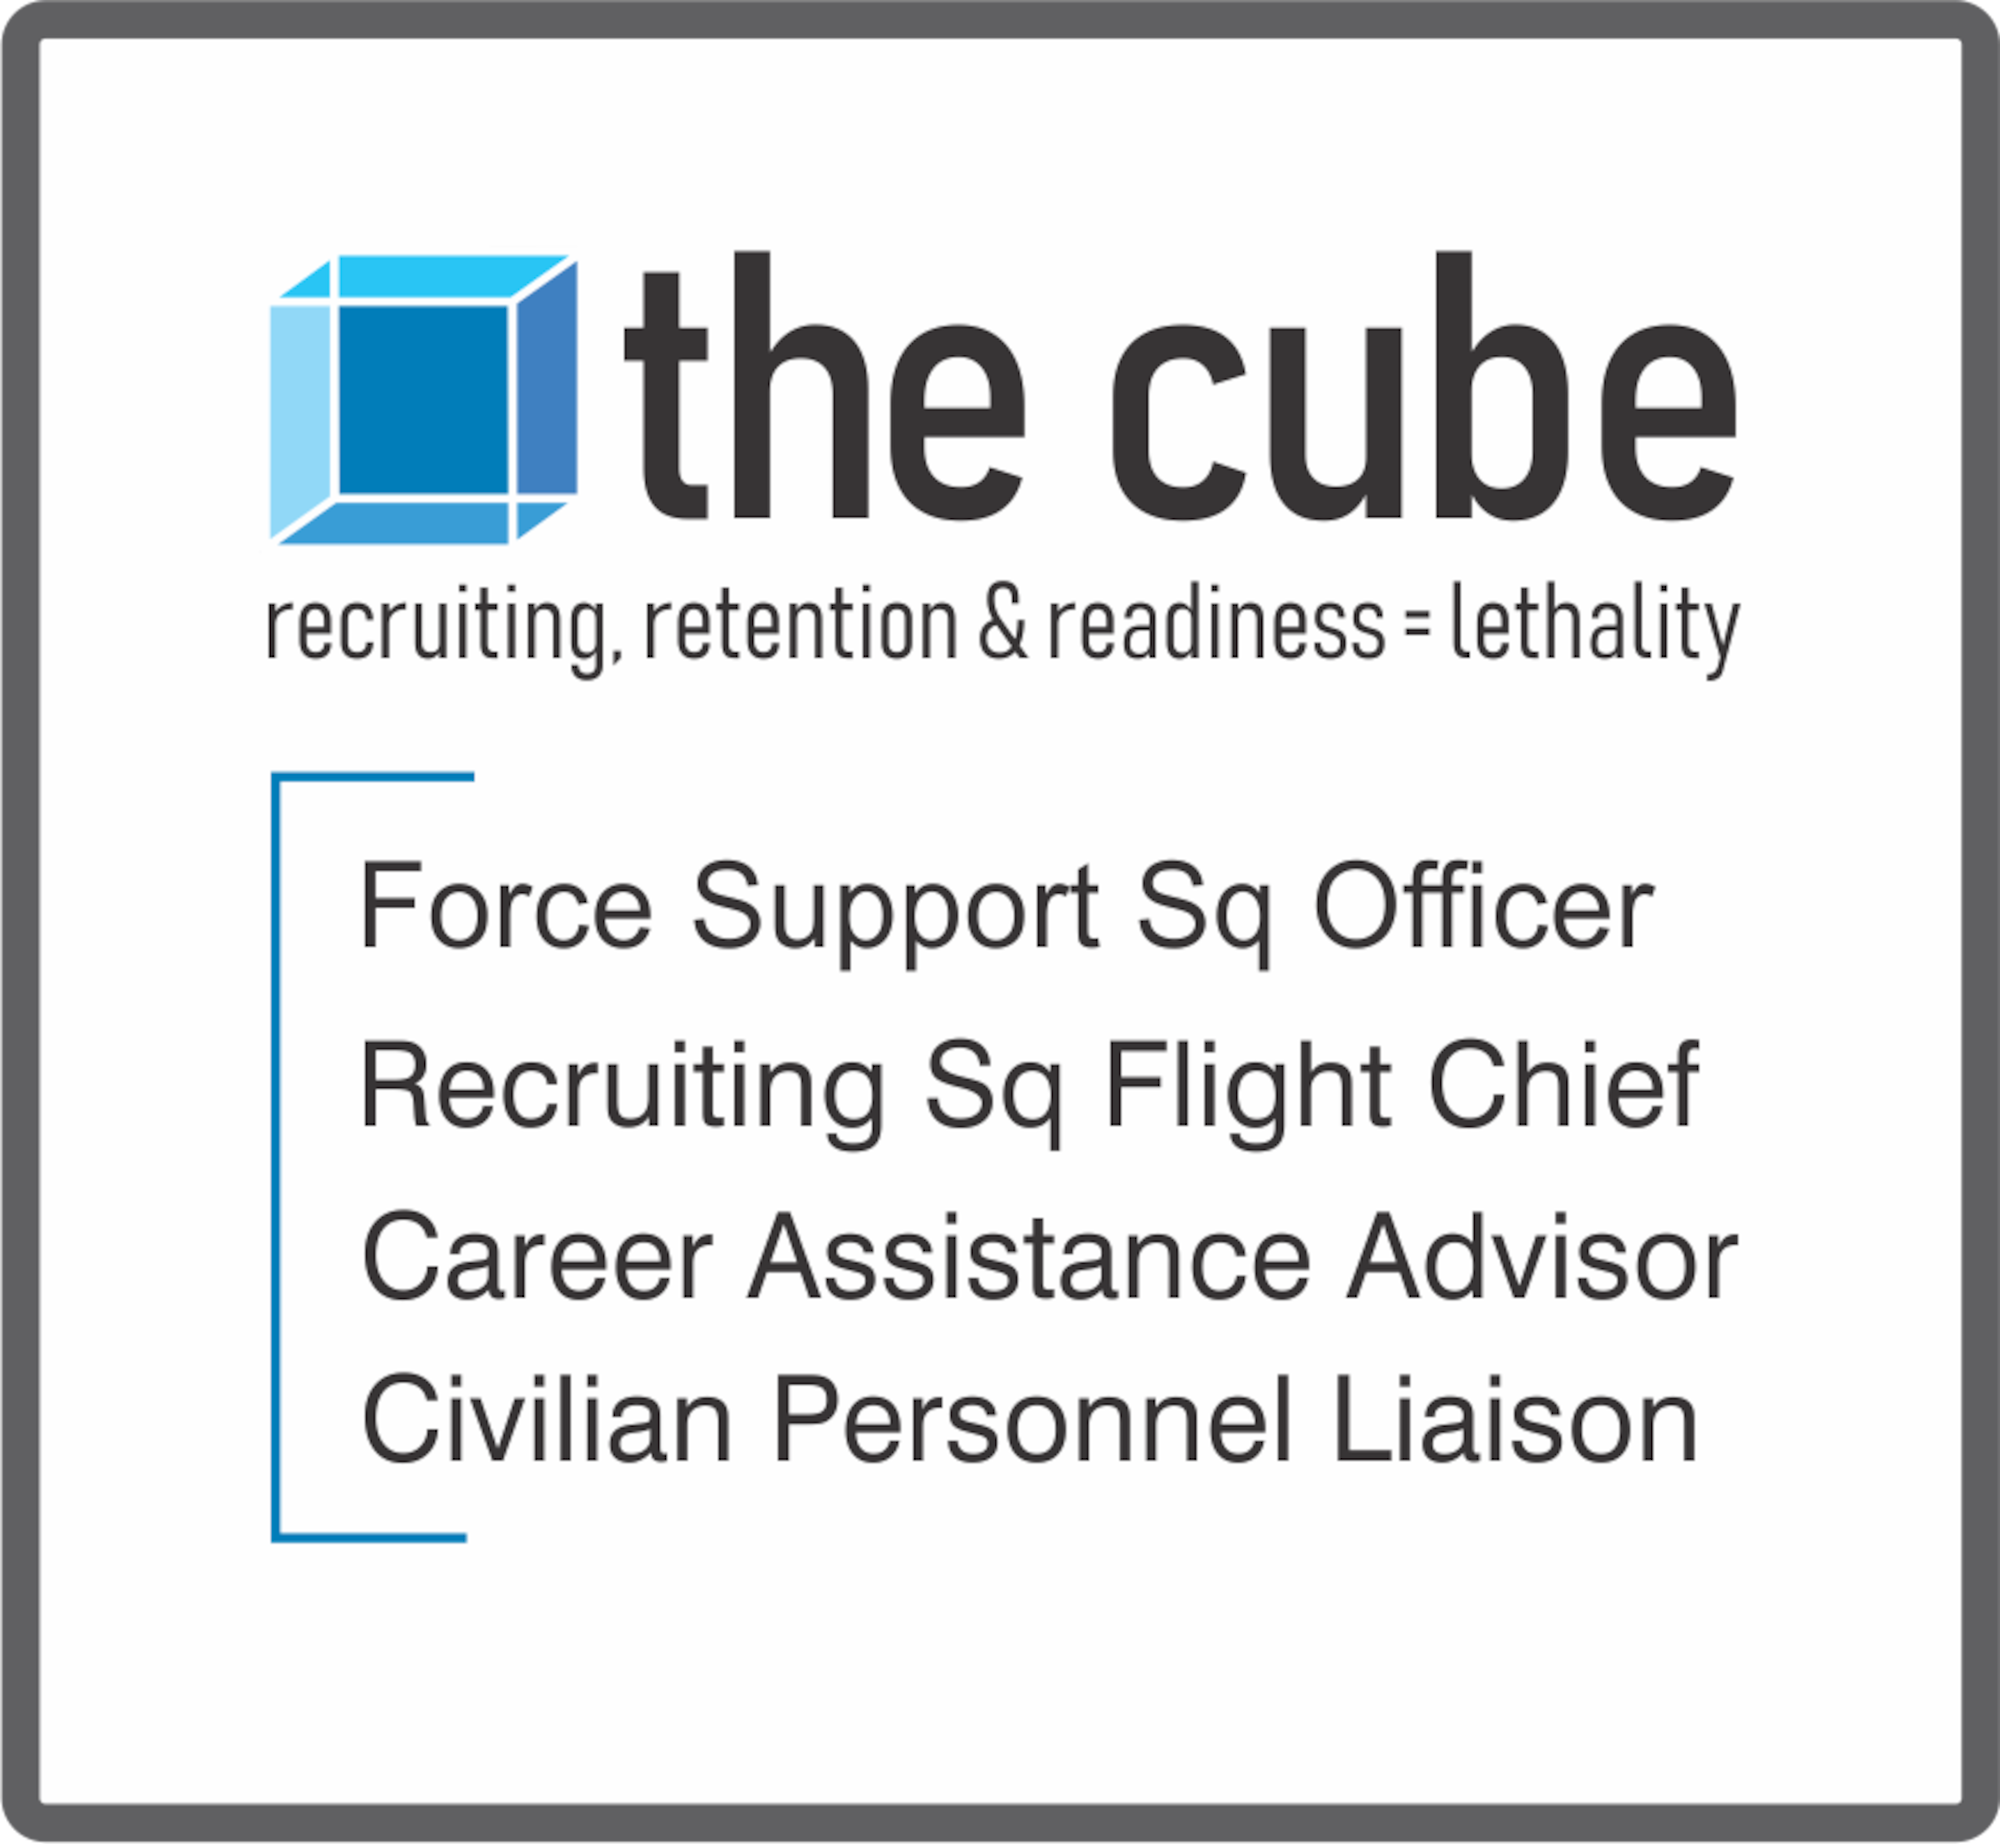 The cube, new reserve initiative designed to help Air Force Reserve Command meet manning challenges.